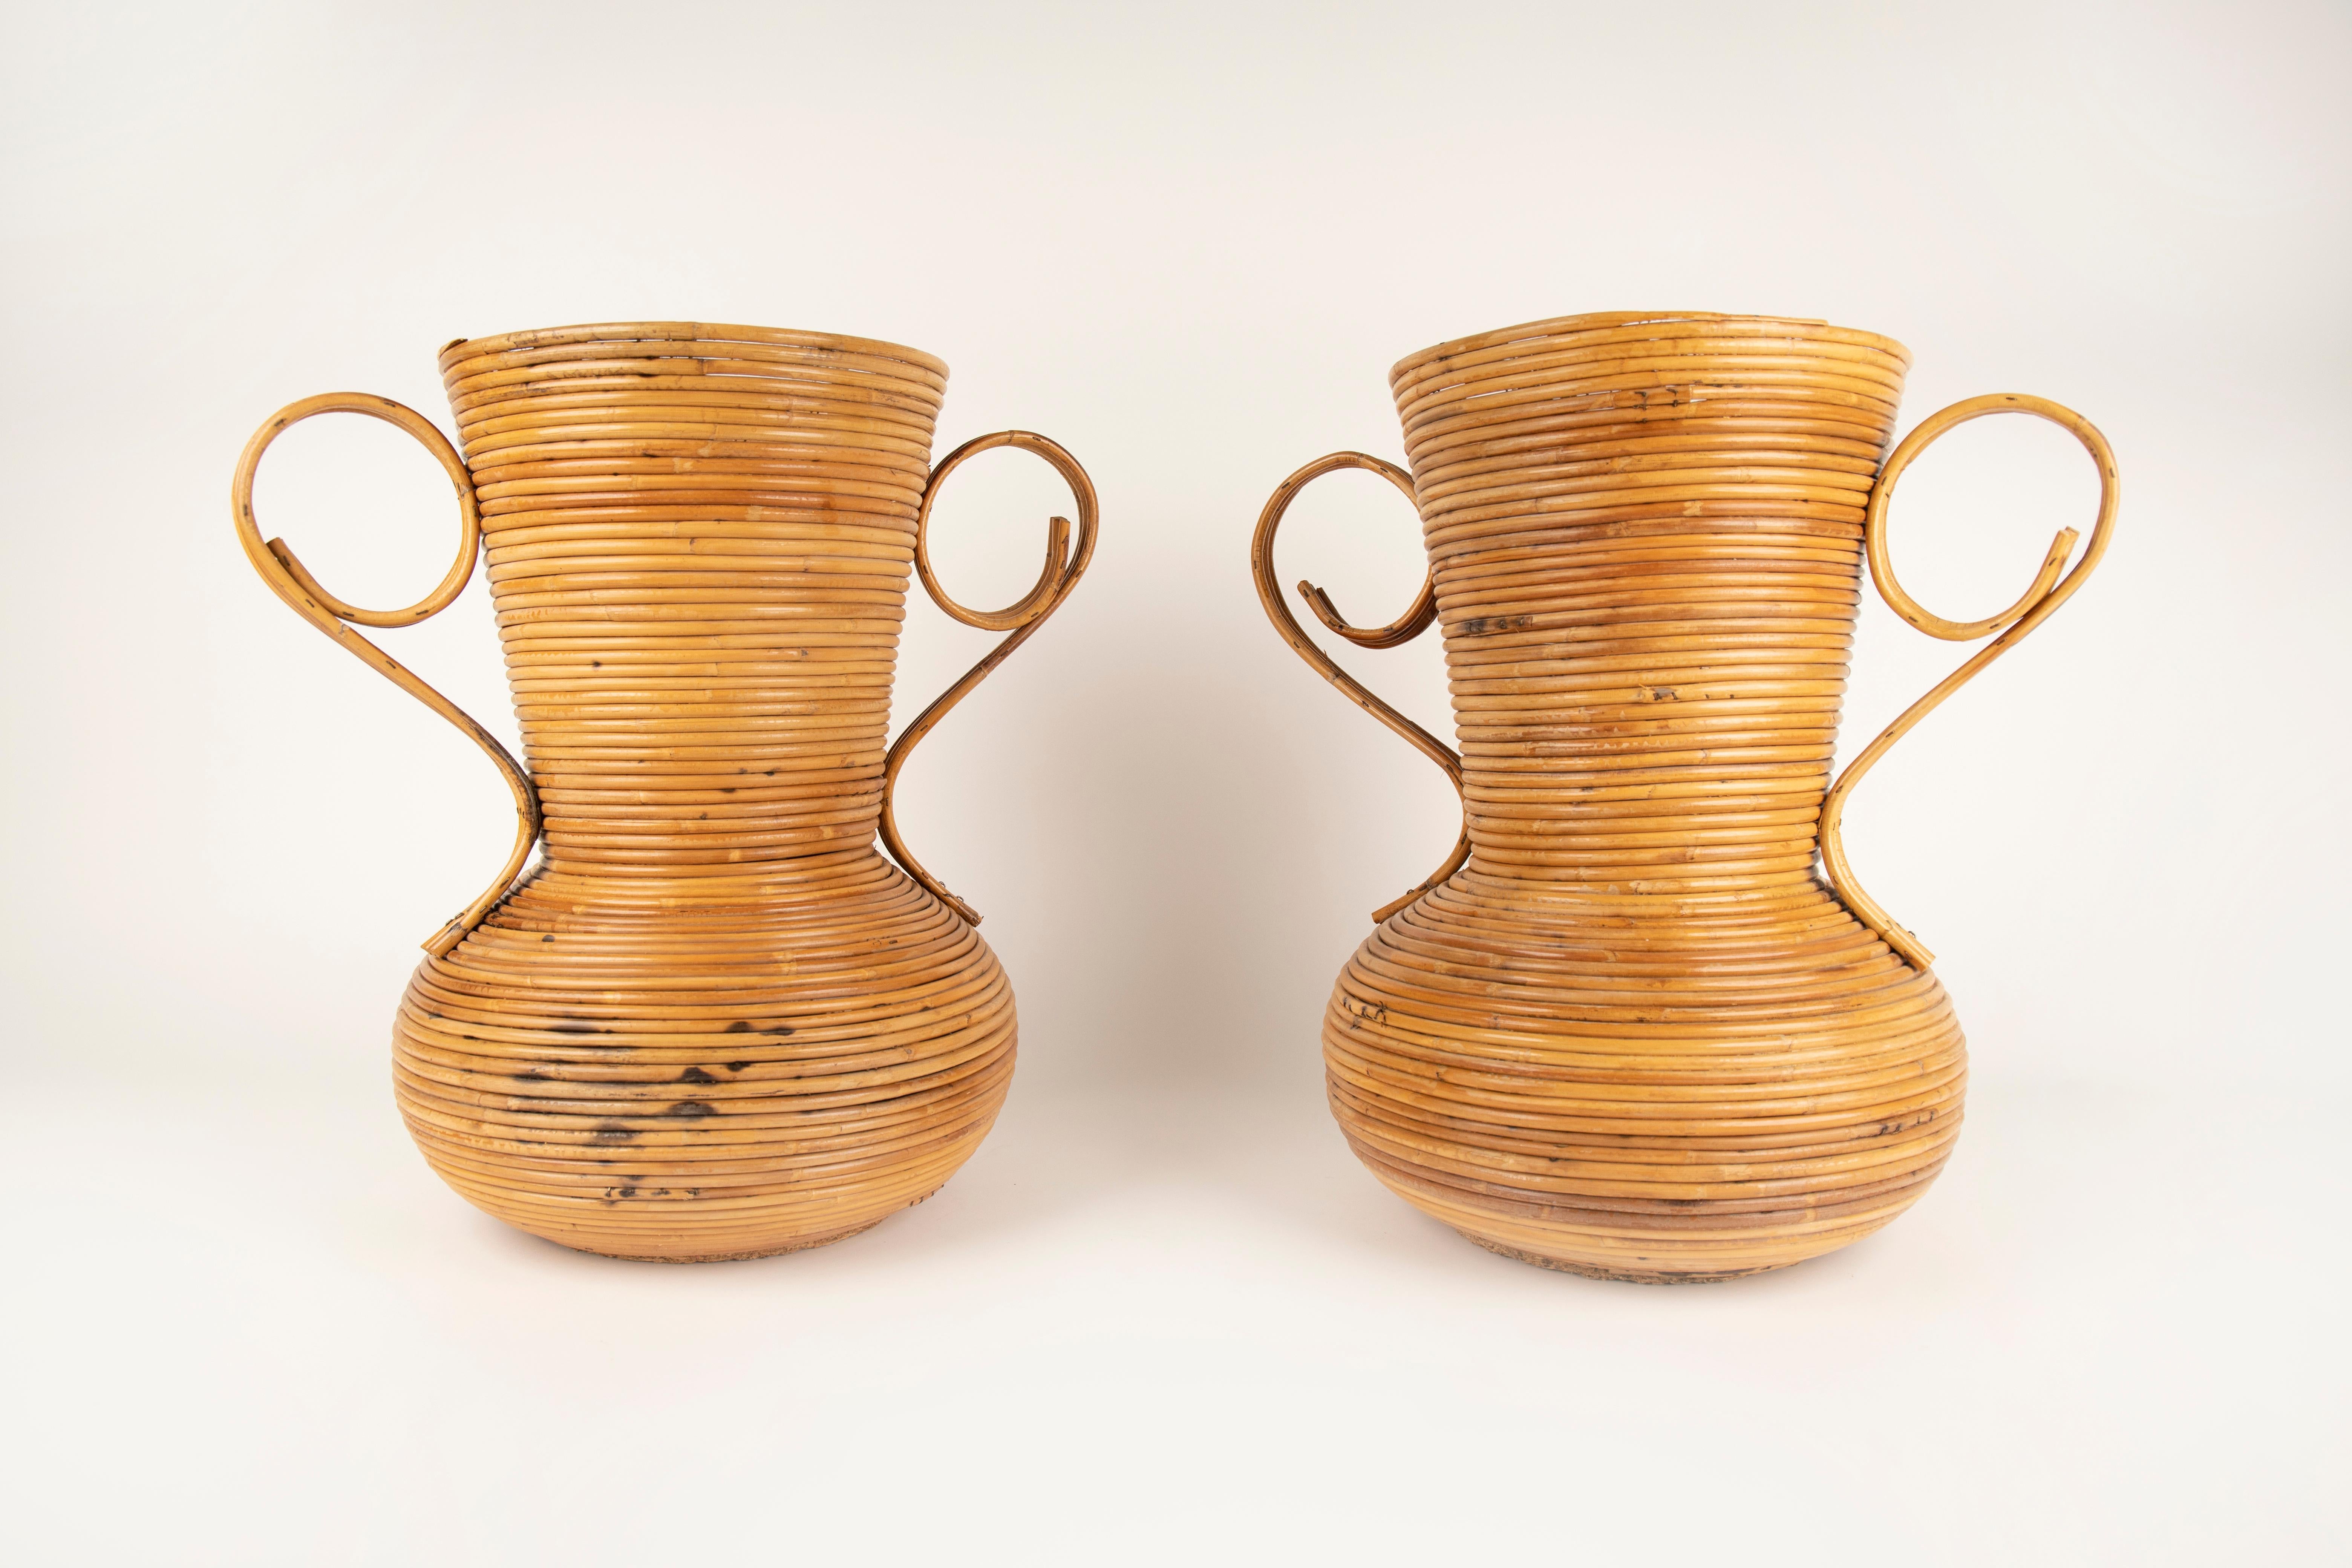 Pair of Rattan Amphoras Vases by Vivai del Sud, Italy 1960s For Sale 1